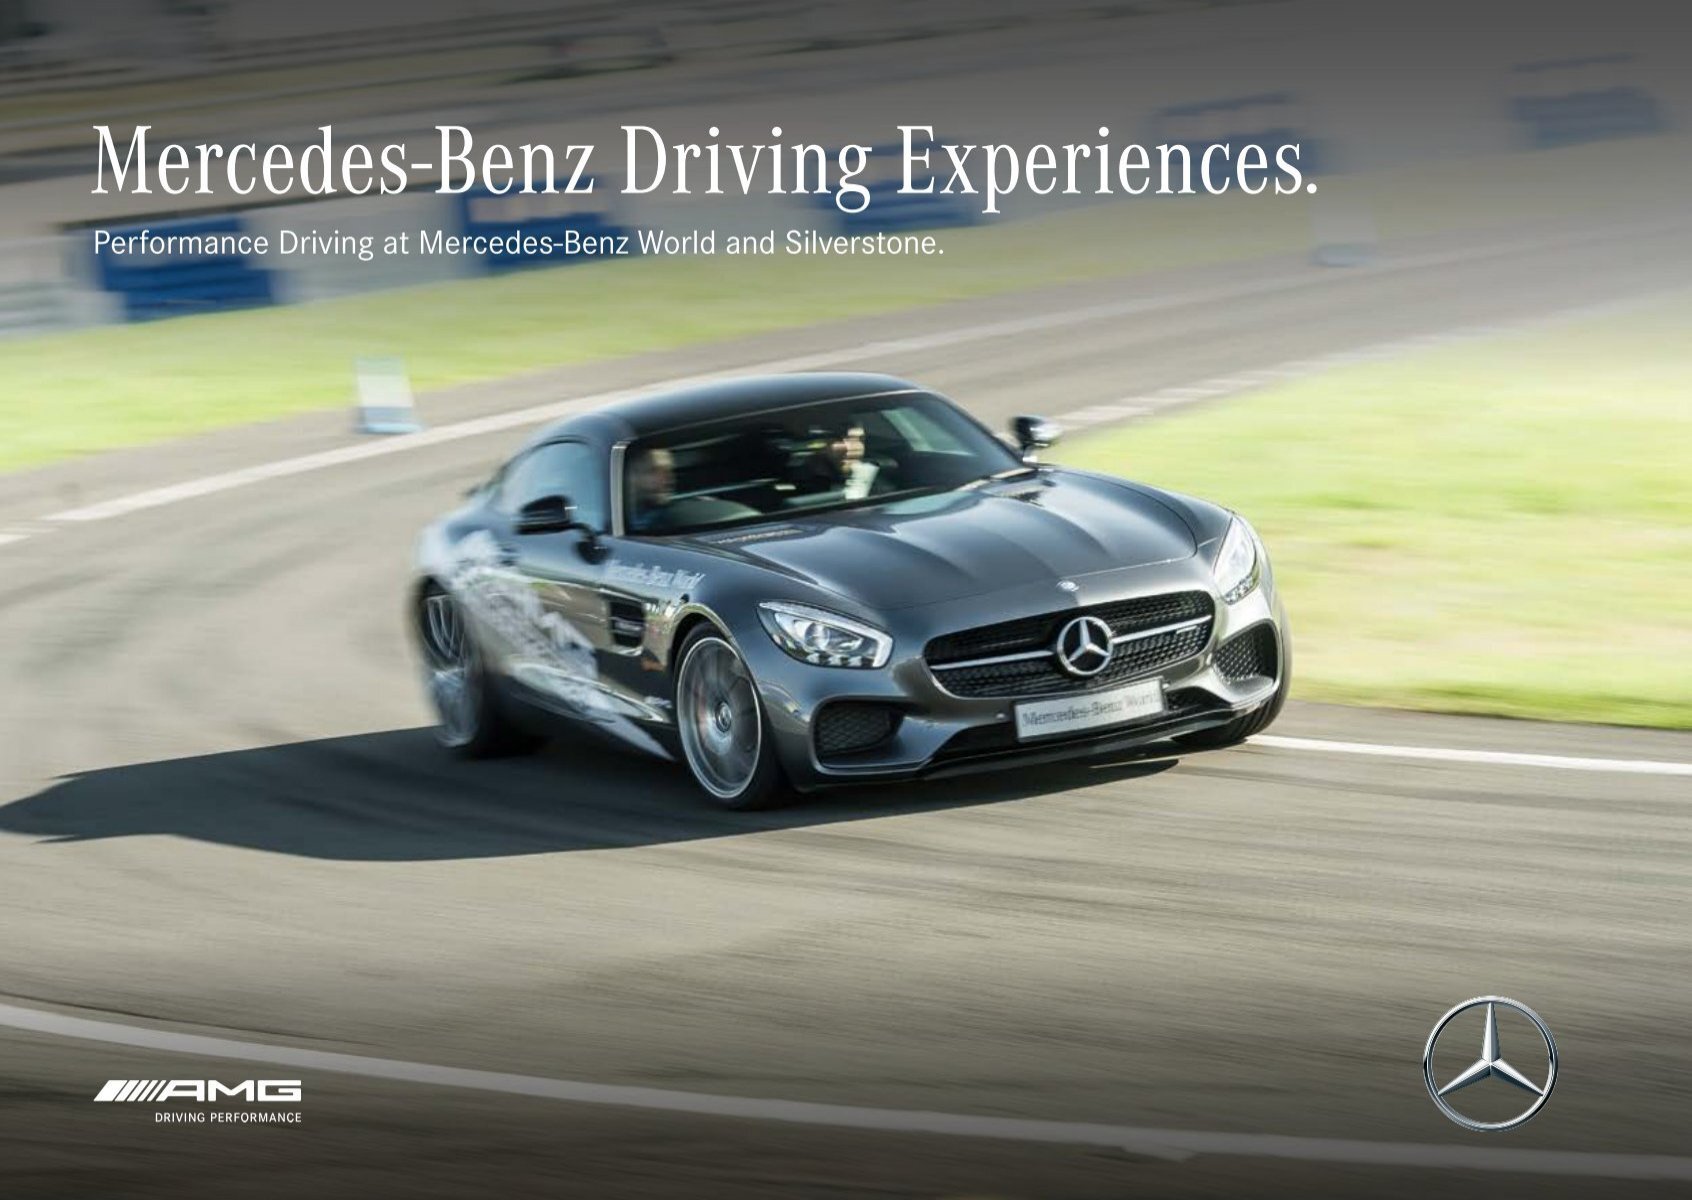 Mercedes-Maybach Racing and Driving Experience